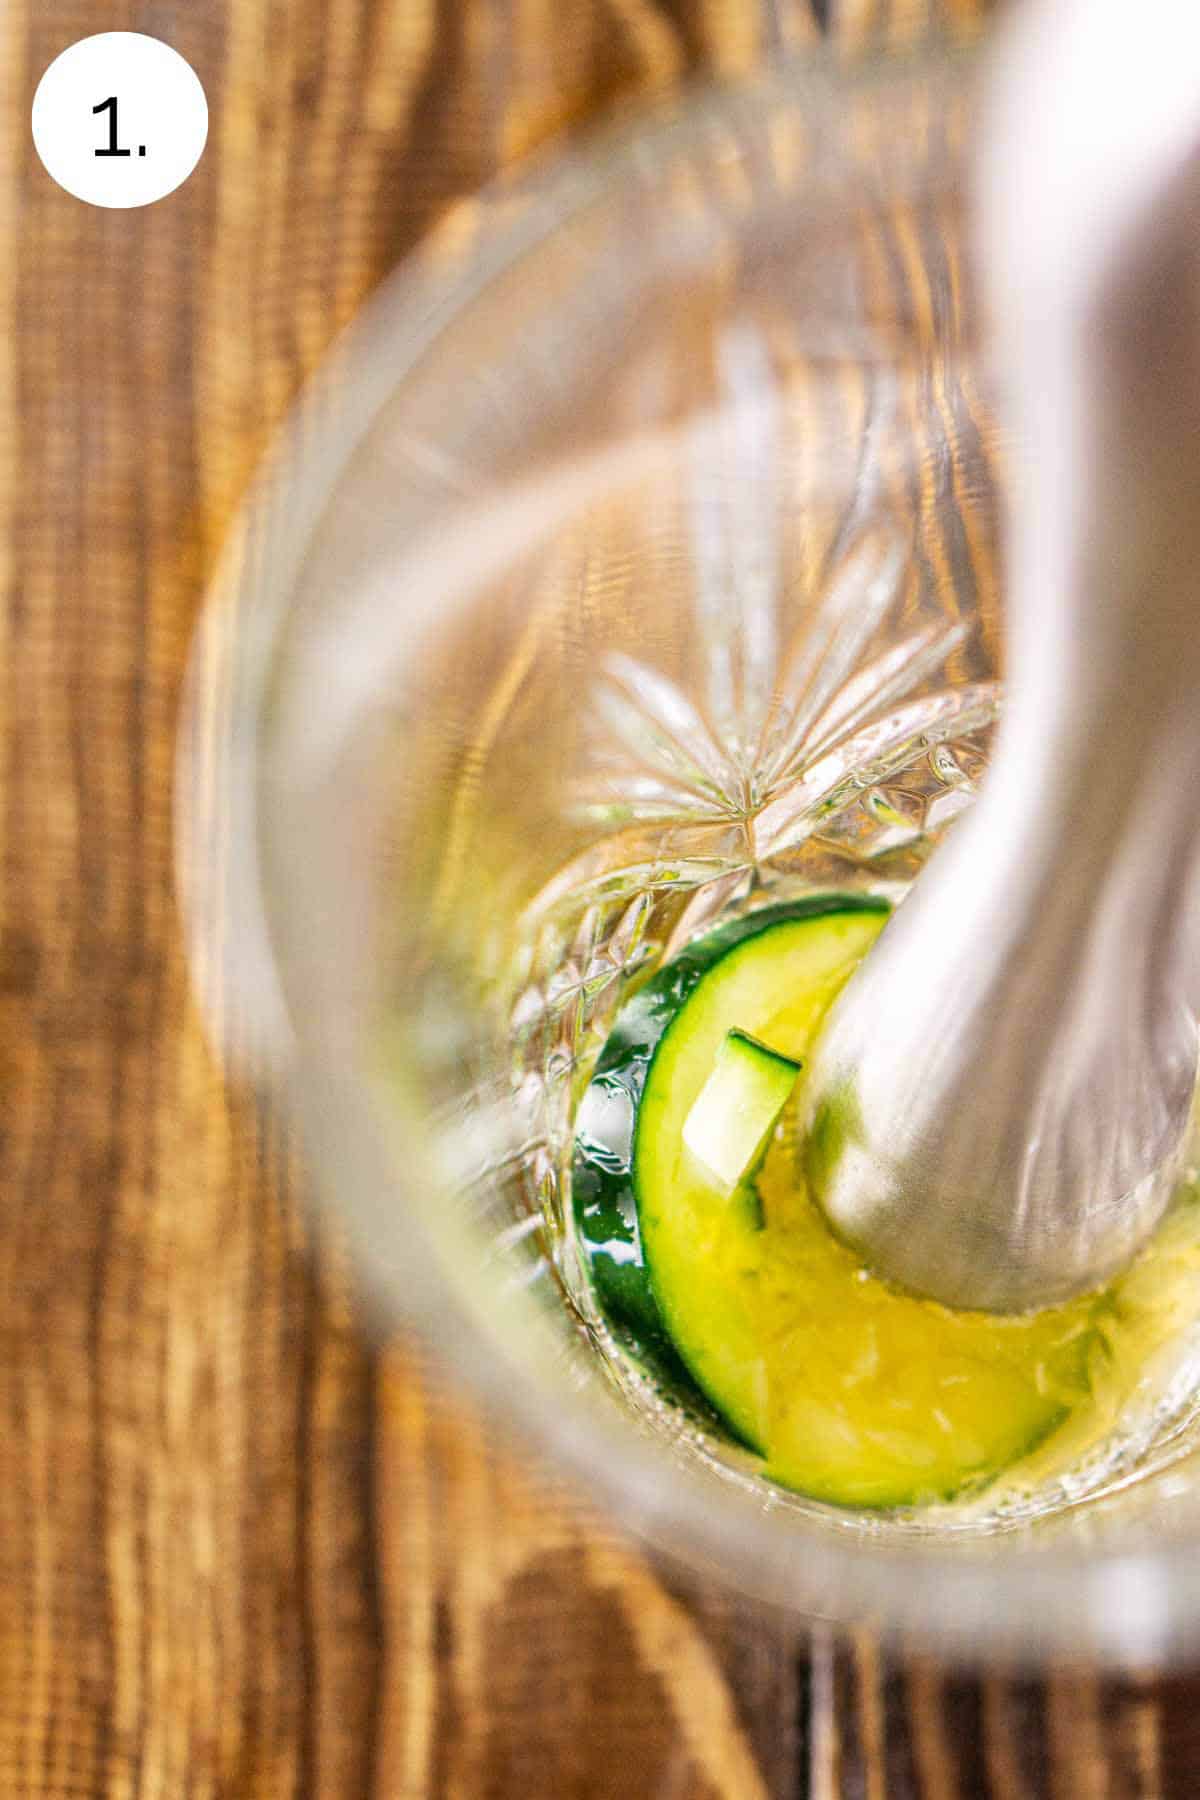 A stainless steel muddler breaking down the cucumber slices with the honey syrup in a clear cocktail shaker on a wooden surface.